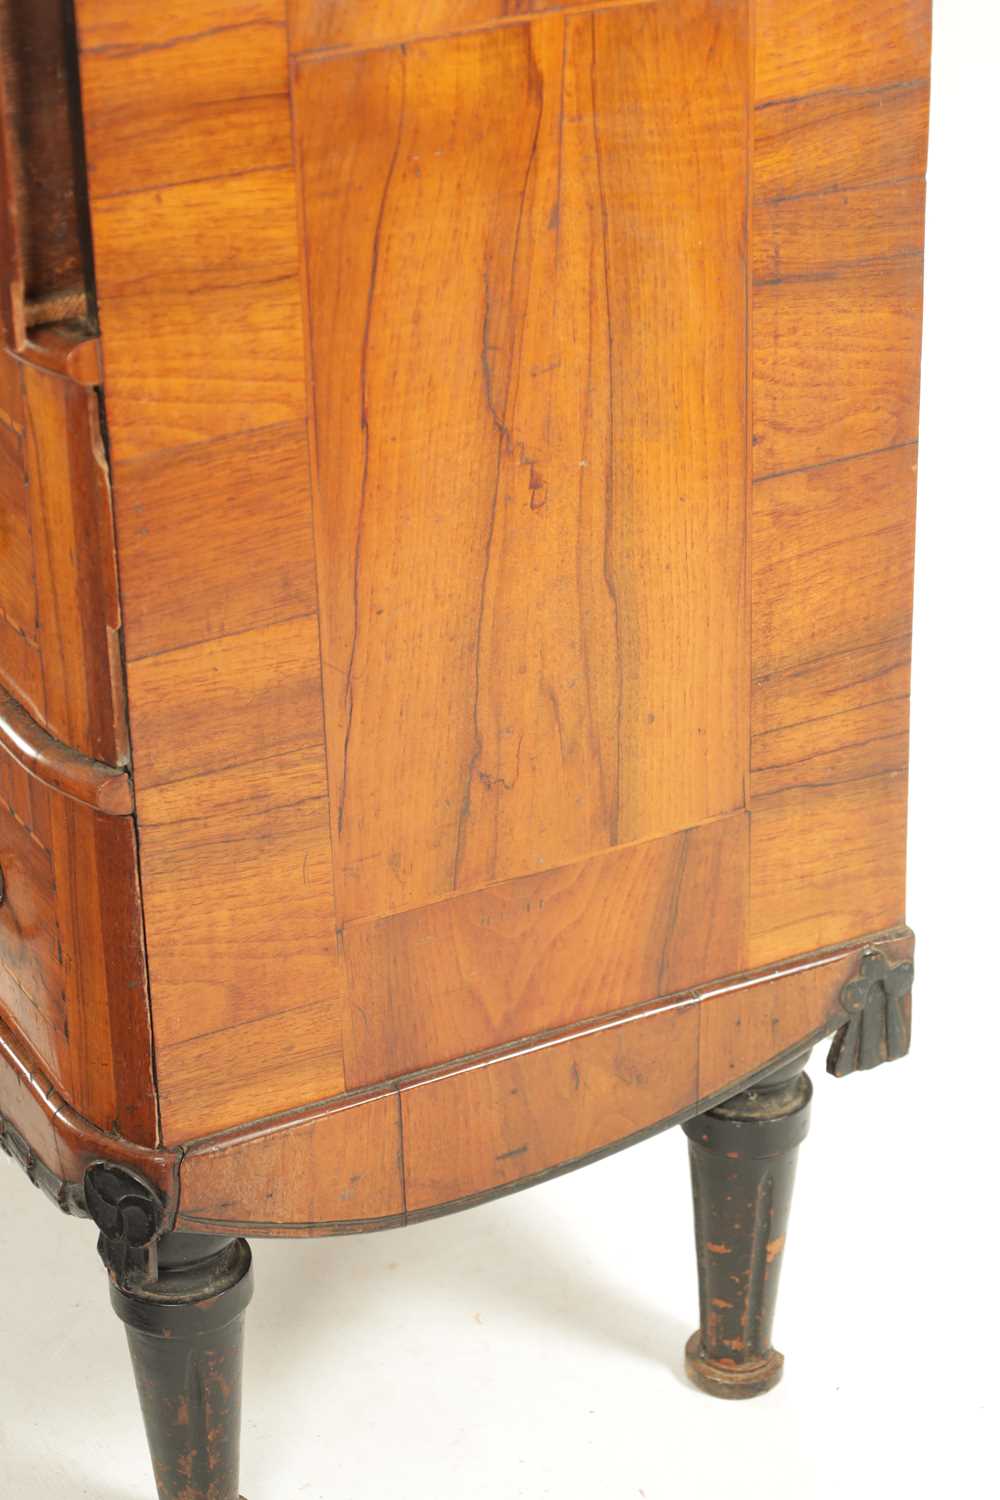 AN EARLY 18TH CENTURY ITALIAN OLIVE WOOD AND WALNUT CHEST OF DRAWERS - Image 8 of 8